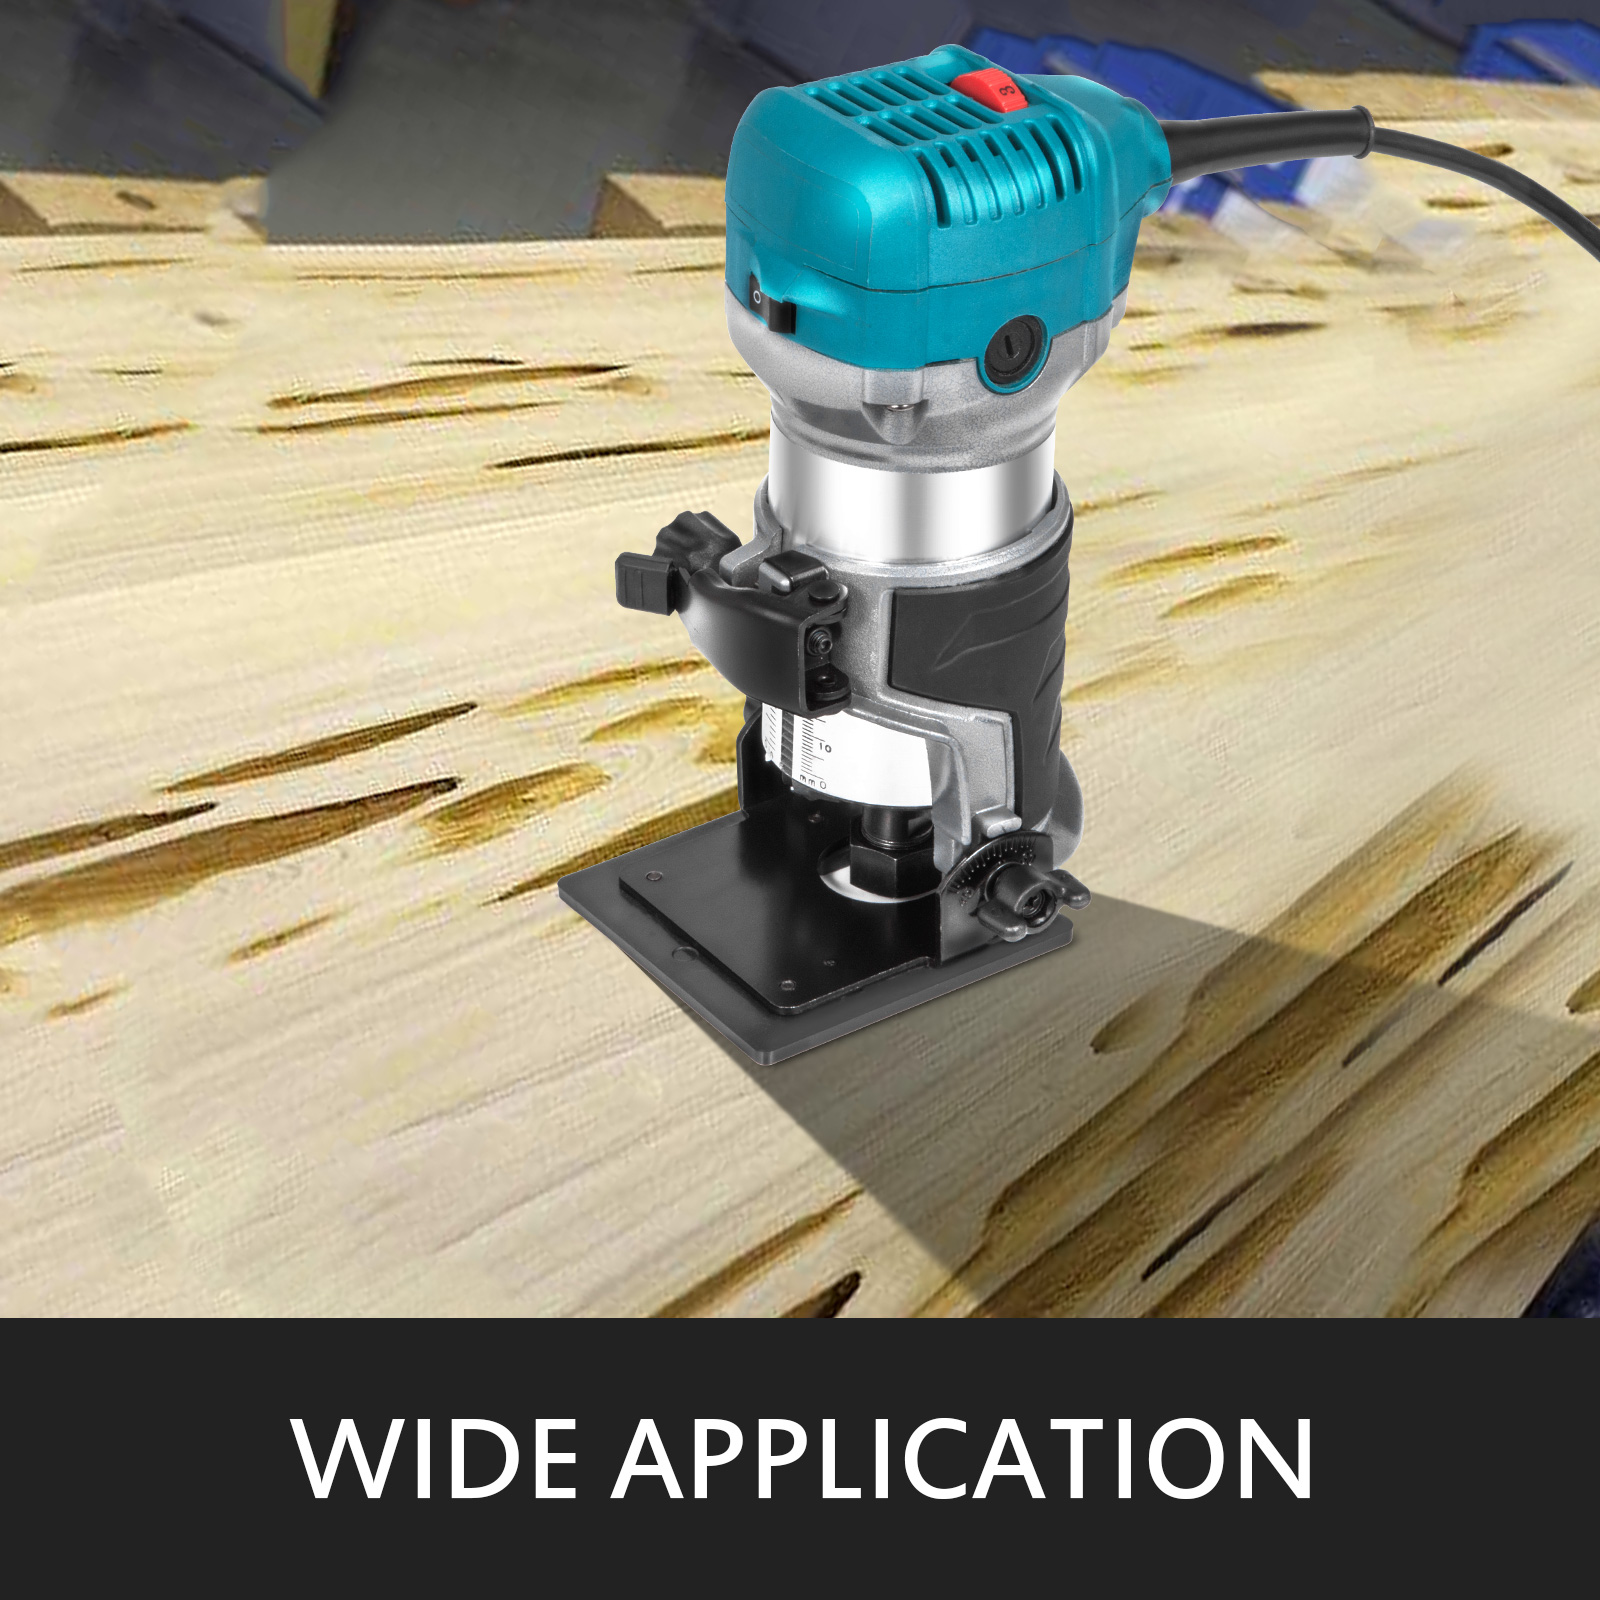 VEVOR Compact Router 1.25HP With Fixed Base, Plunge Base and Tilt